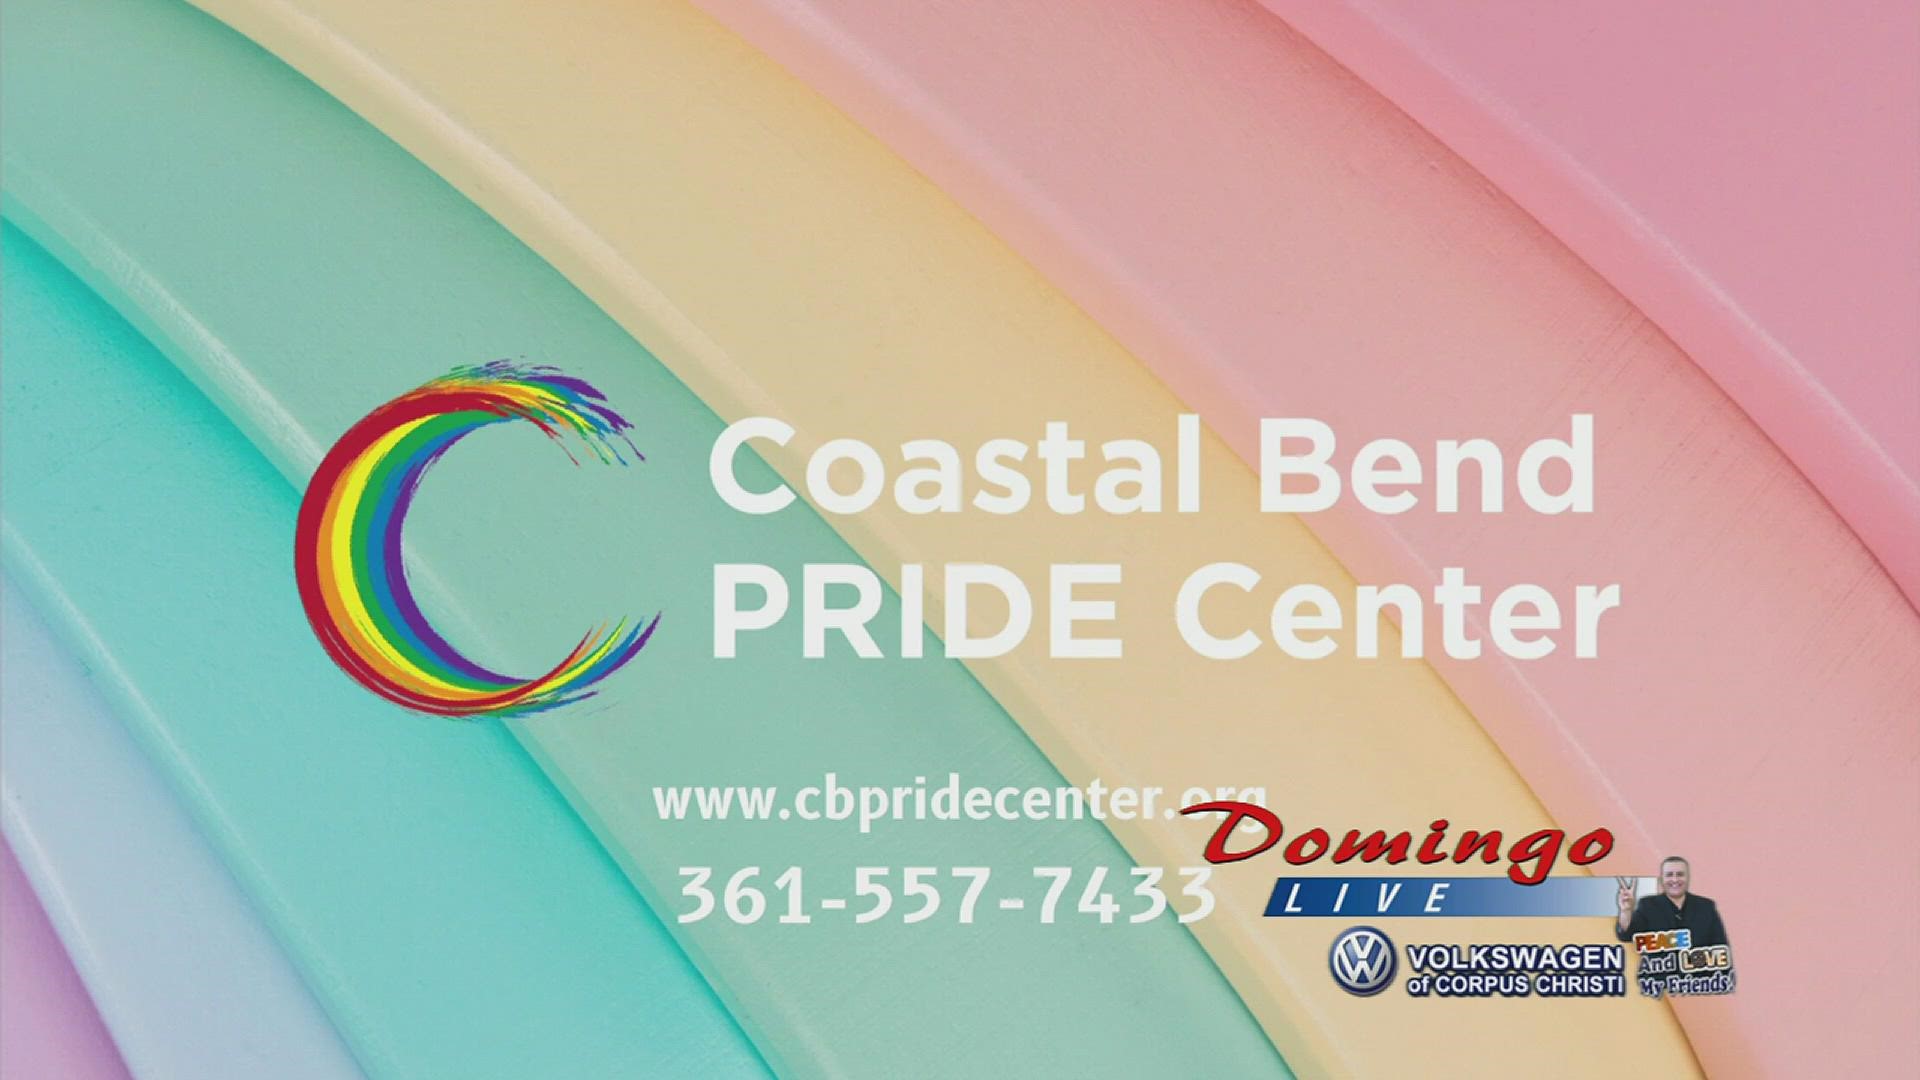 The Coastal Bend PRIDE Center has received the TEGNA Foundation's first Diversity, Equity and Inclusion grant, which will support LGBTQ+ Latinx youth and families.